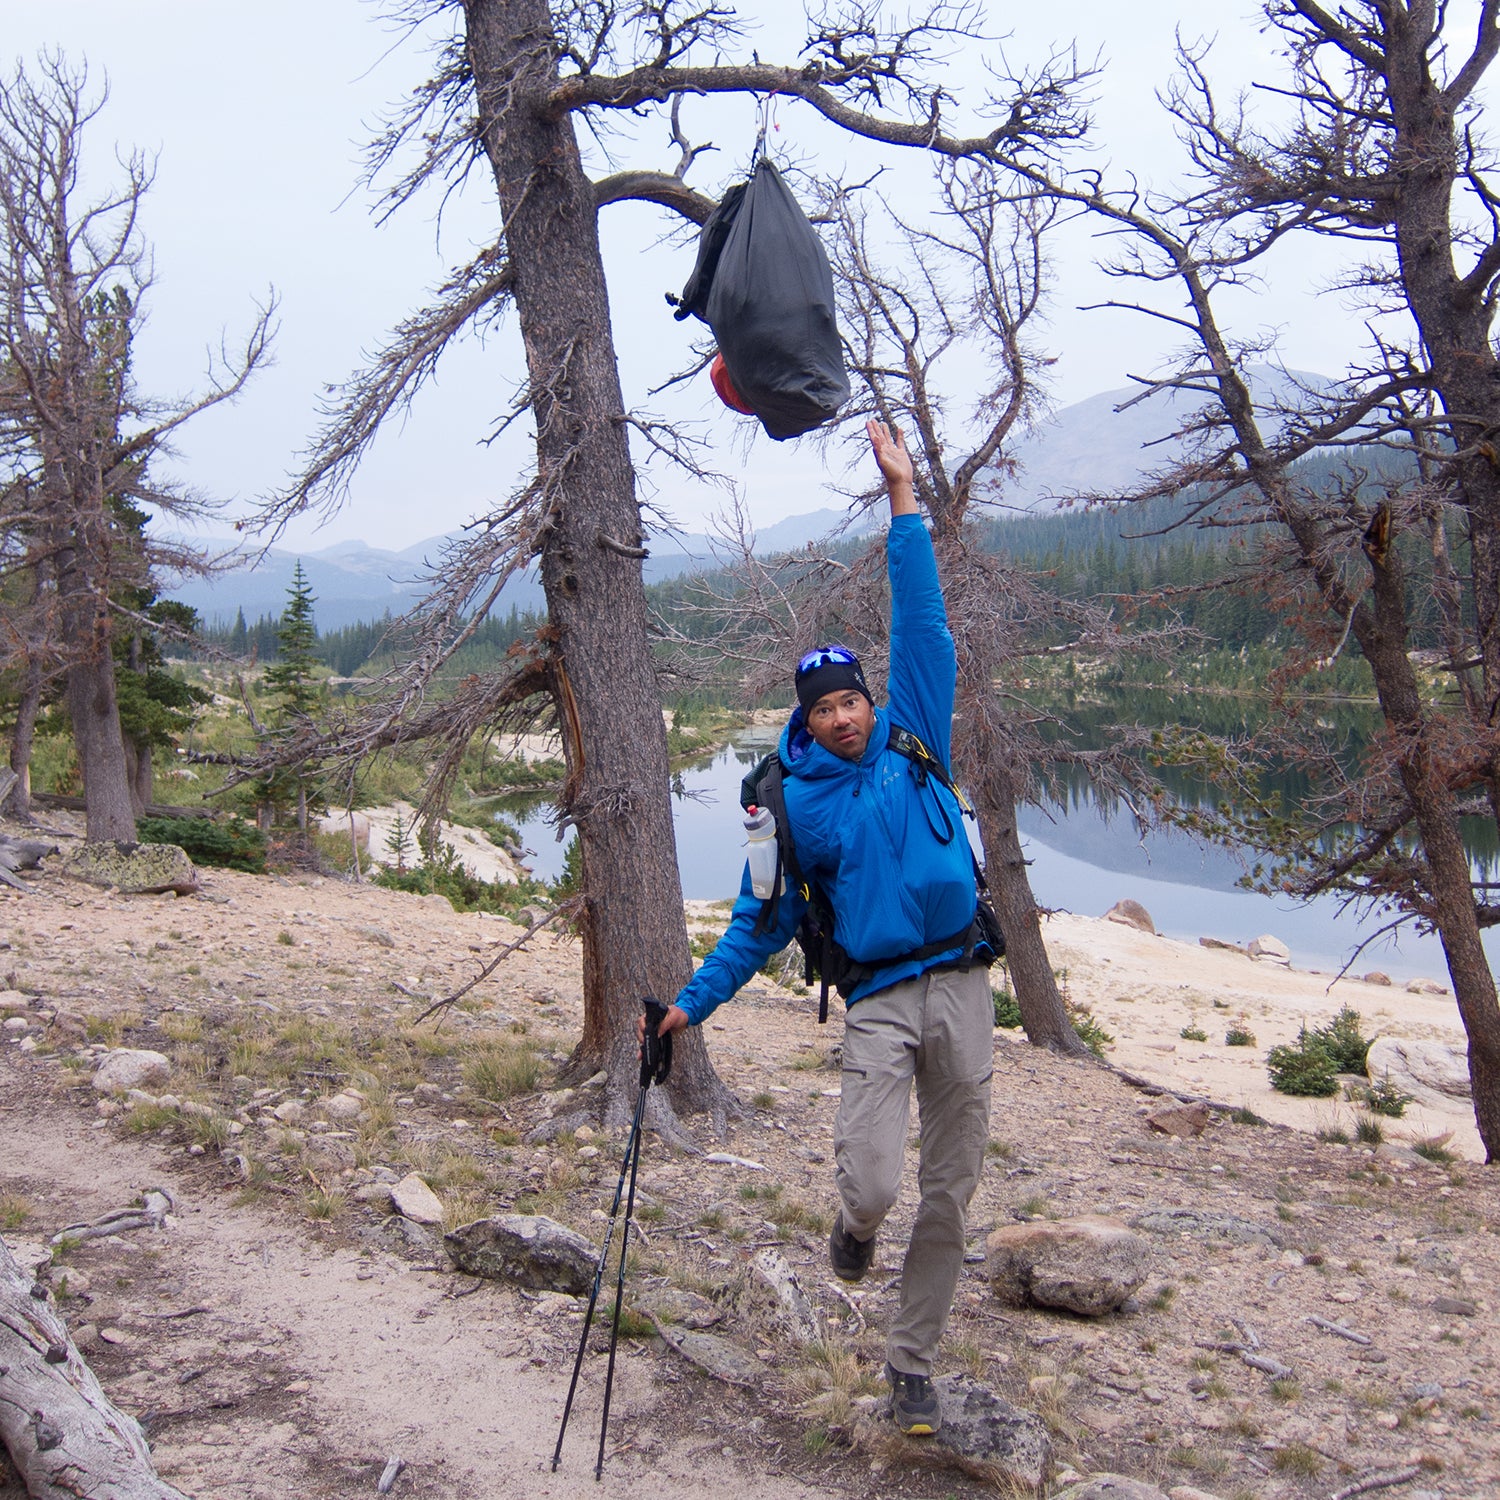 A sub-par bear bag belonging to a commercial group in Rocky Mountain National Park. The park now requires hard-sided canisters.